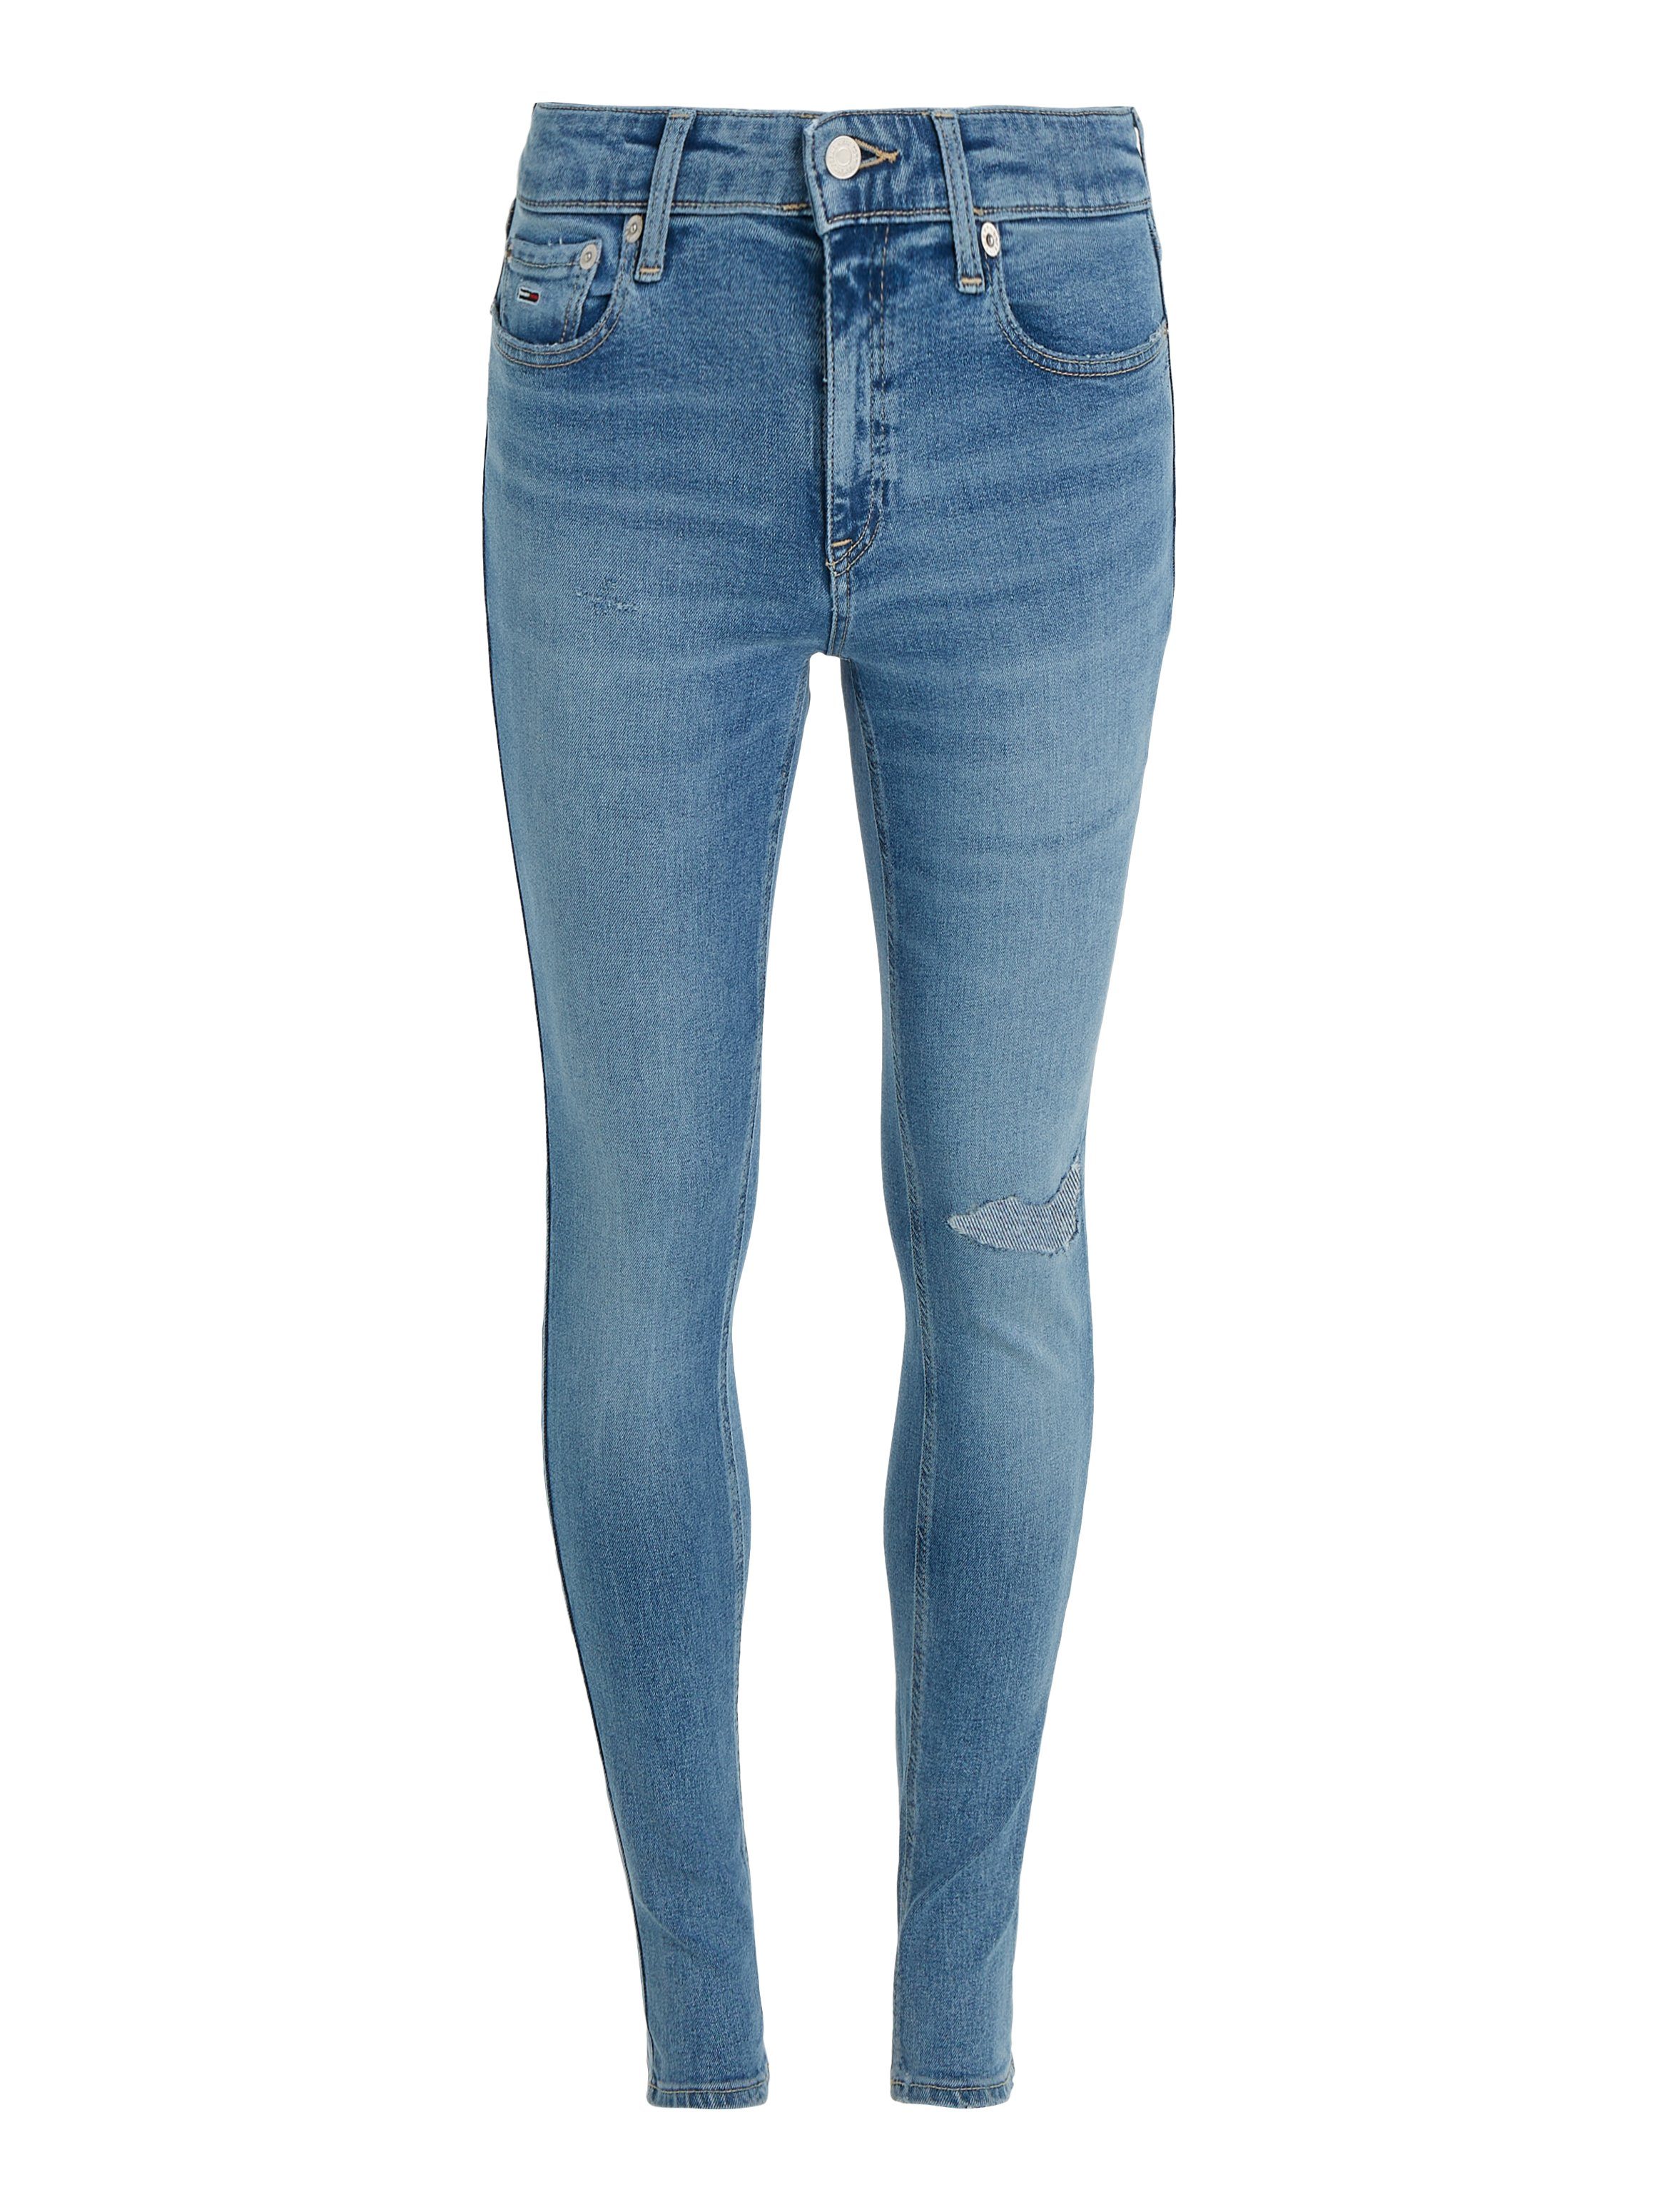 Markenlabel denim3 Farbe light Tommy Badge Jeans mit Jeans & Tommy Nora Skinny-fit-Jeans